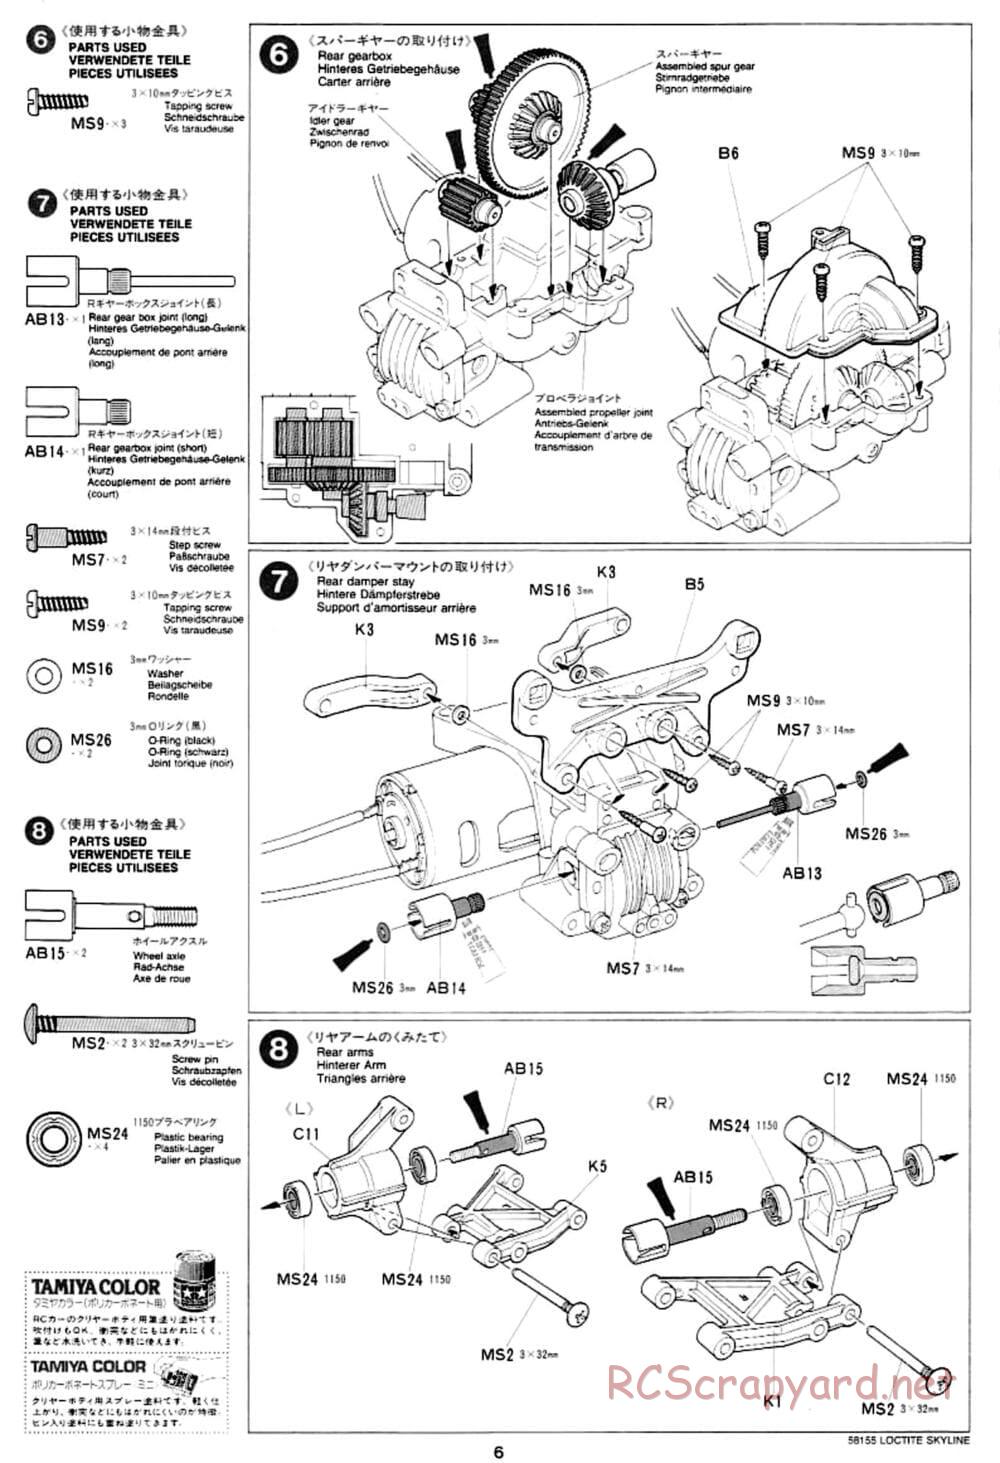 Tamiya - Loctite Nissan Skyline GT-R N1 - TA-02 Chassis - Manual - Page 6